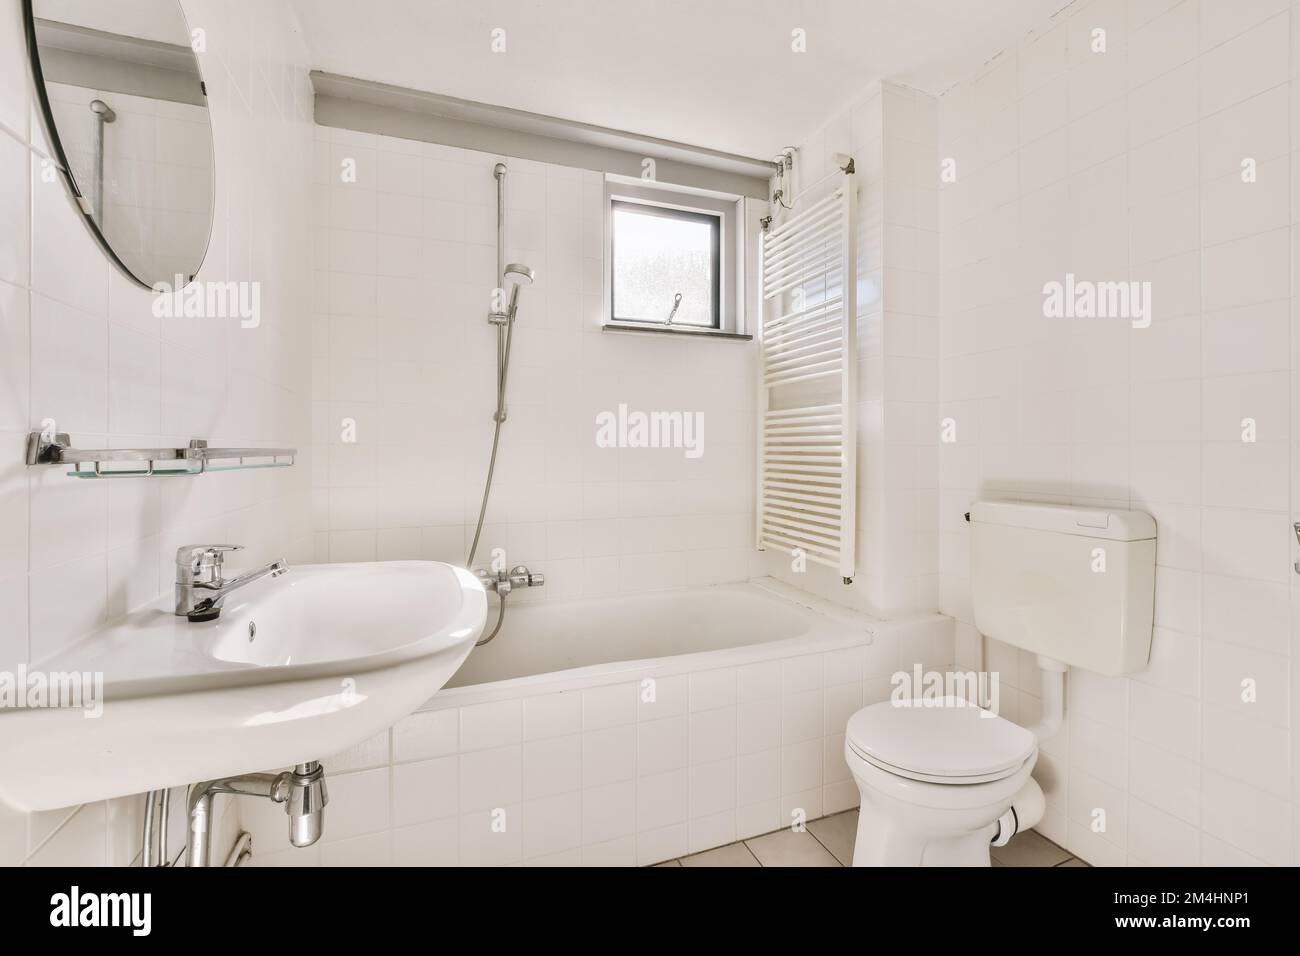 a bathroom with a sink, toilet and bathtub in the same room on the other side of the wall Stock Photo